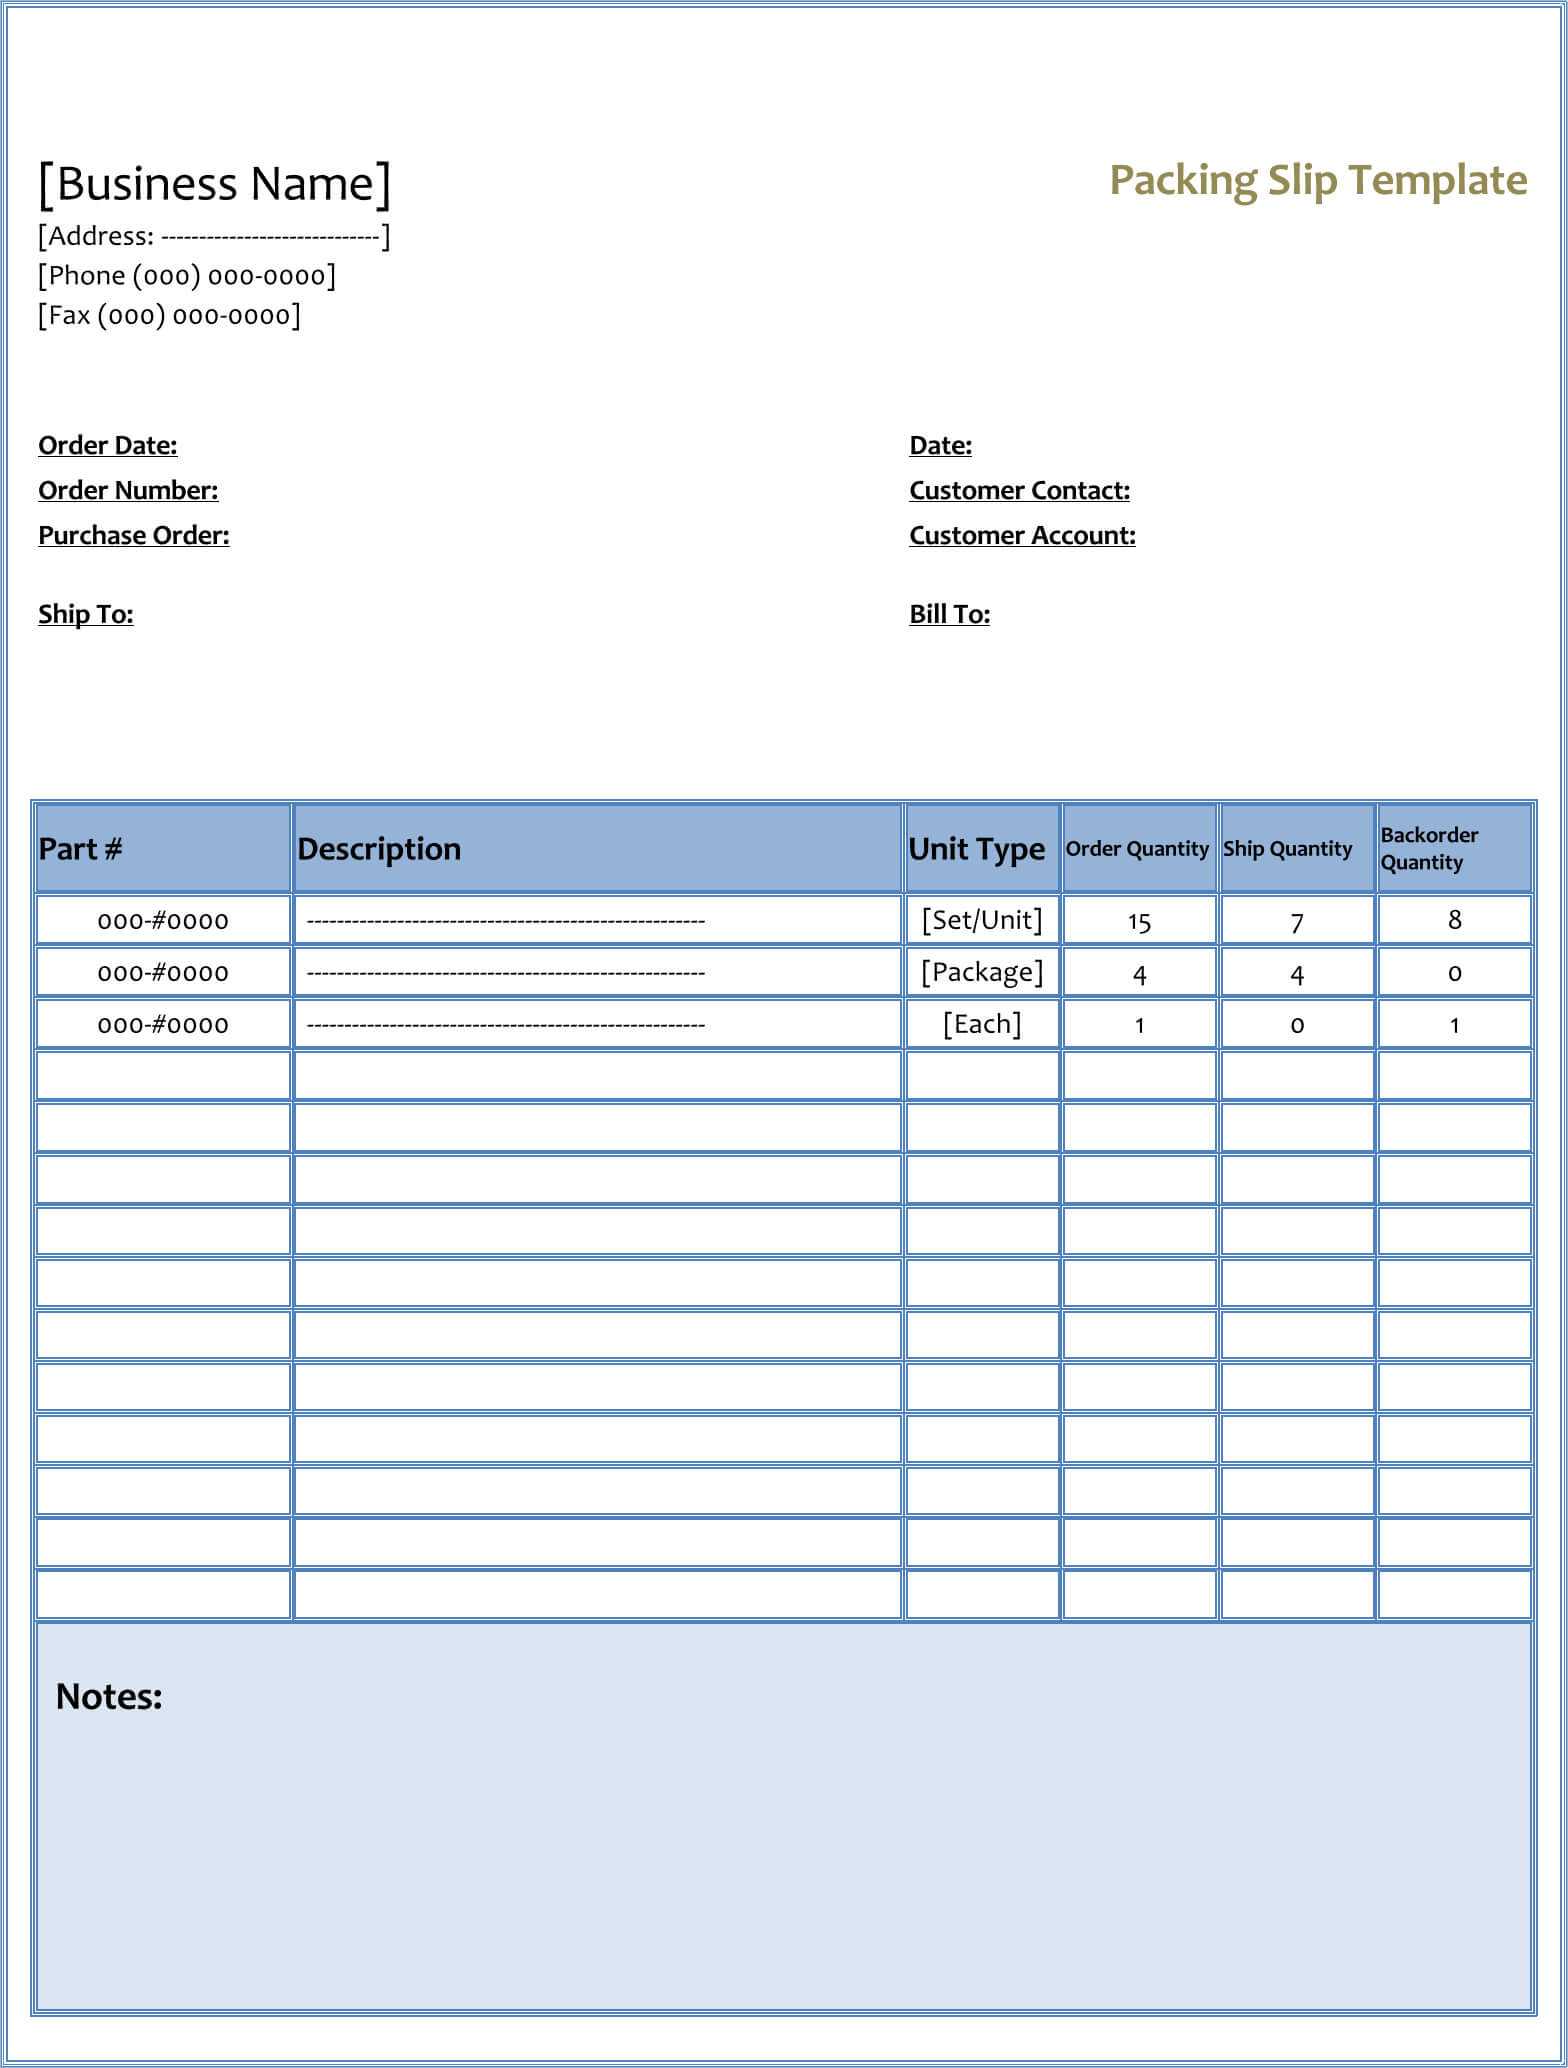 25+ Free Shipping & Packing Slip Templates (For Word & Excel) With Regard To Blank Packing List Template